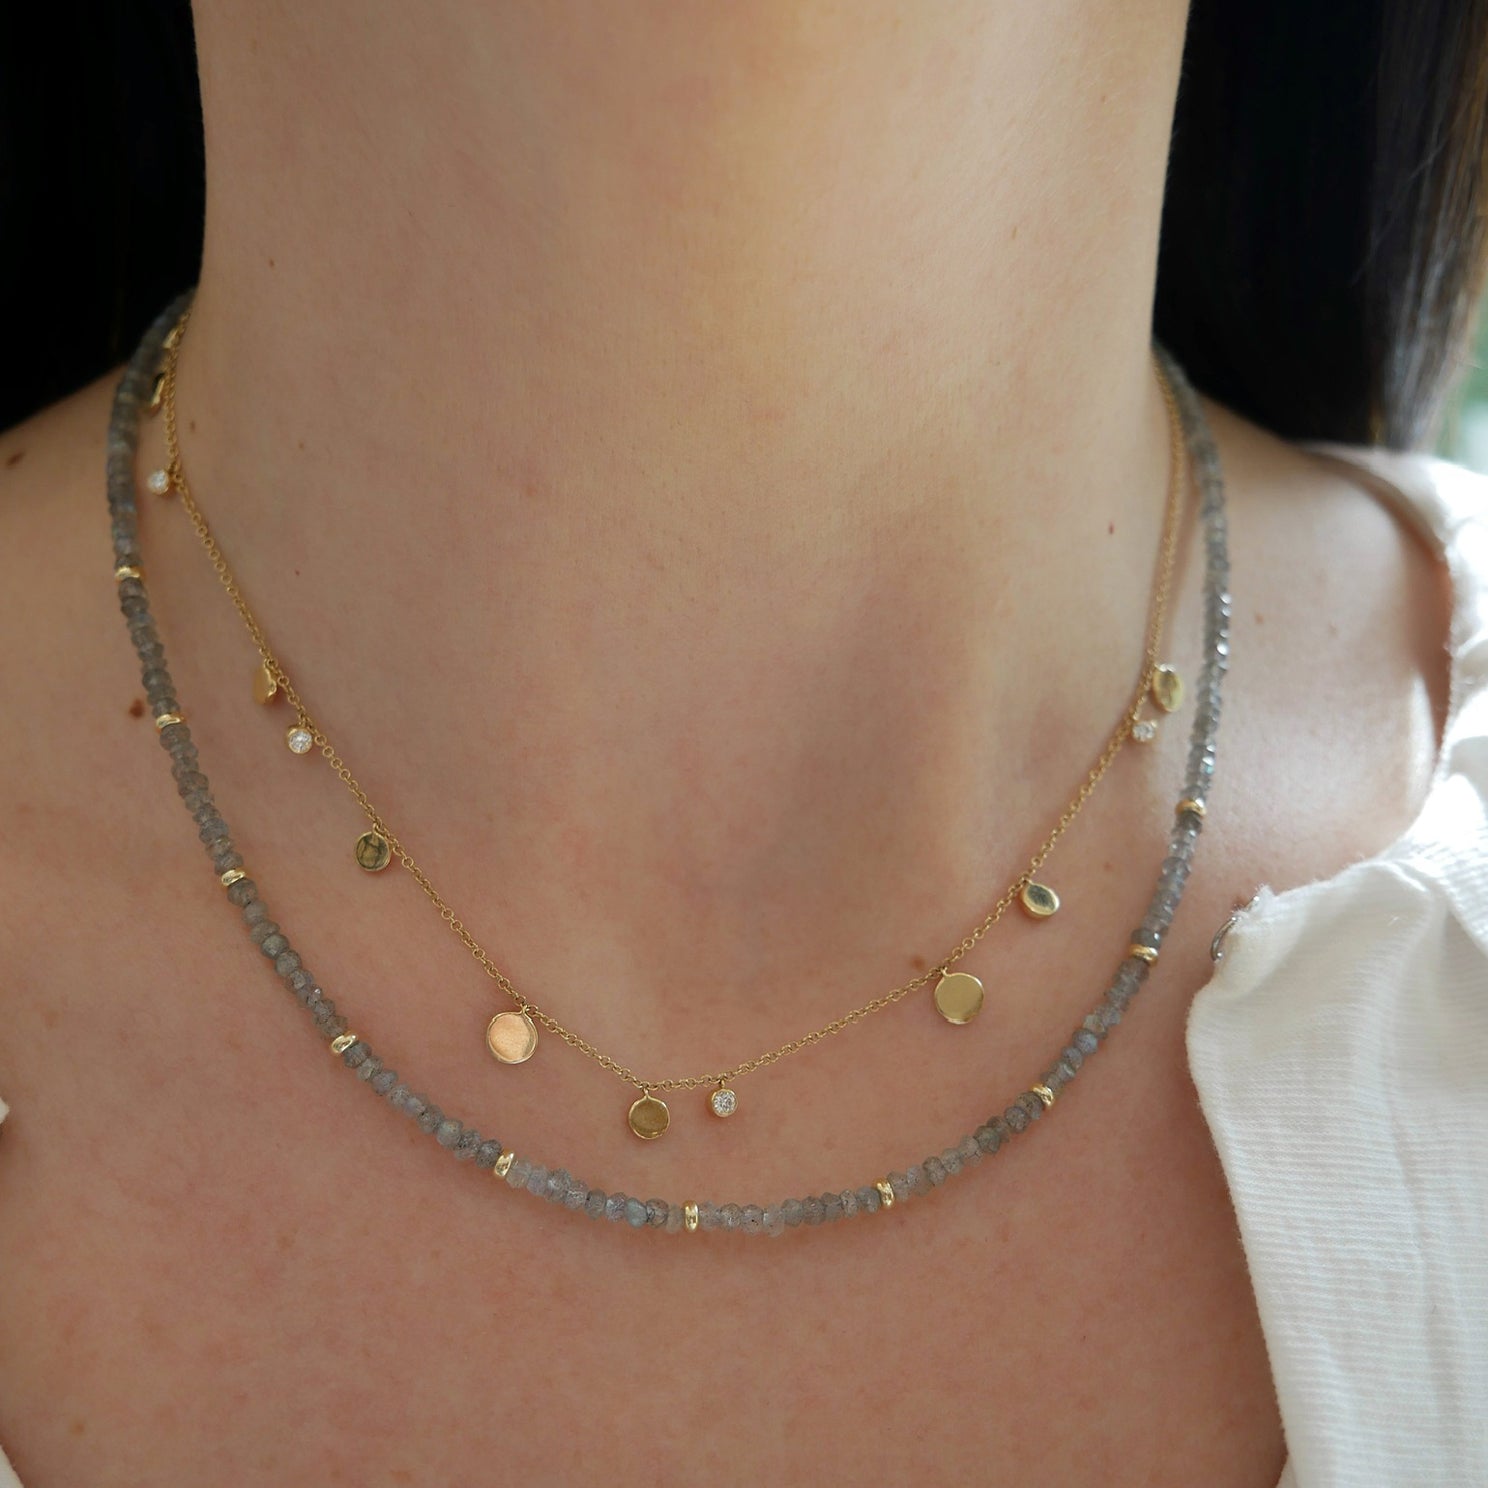 Birthstone Bead Necklace In Labradorite styled on neck with gold confetti necklace